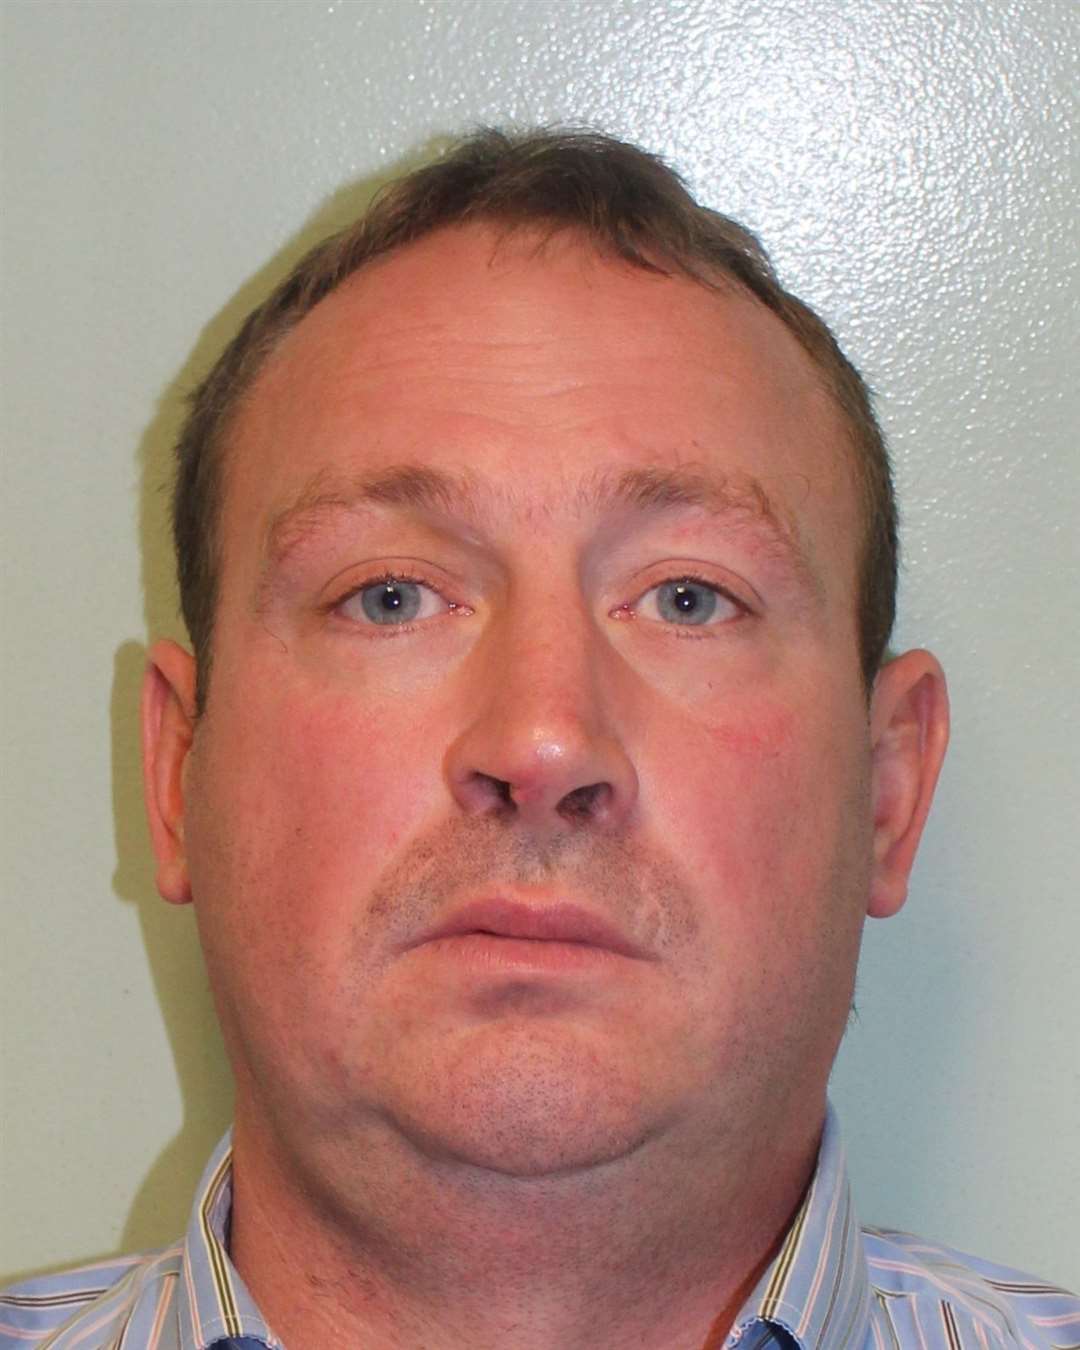 John O'Connor, of West Kingsdown, played an "integral" role in defrauding the pensioner.